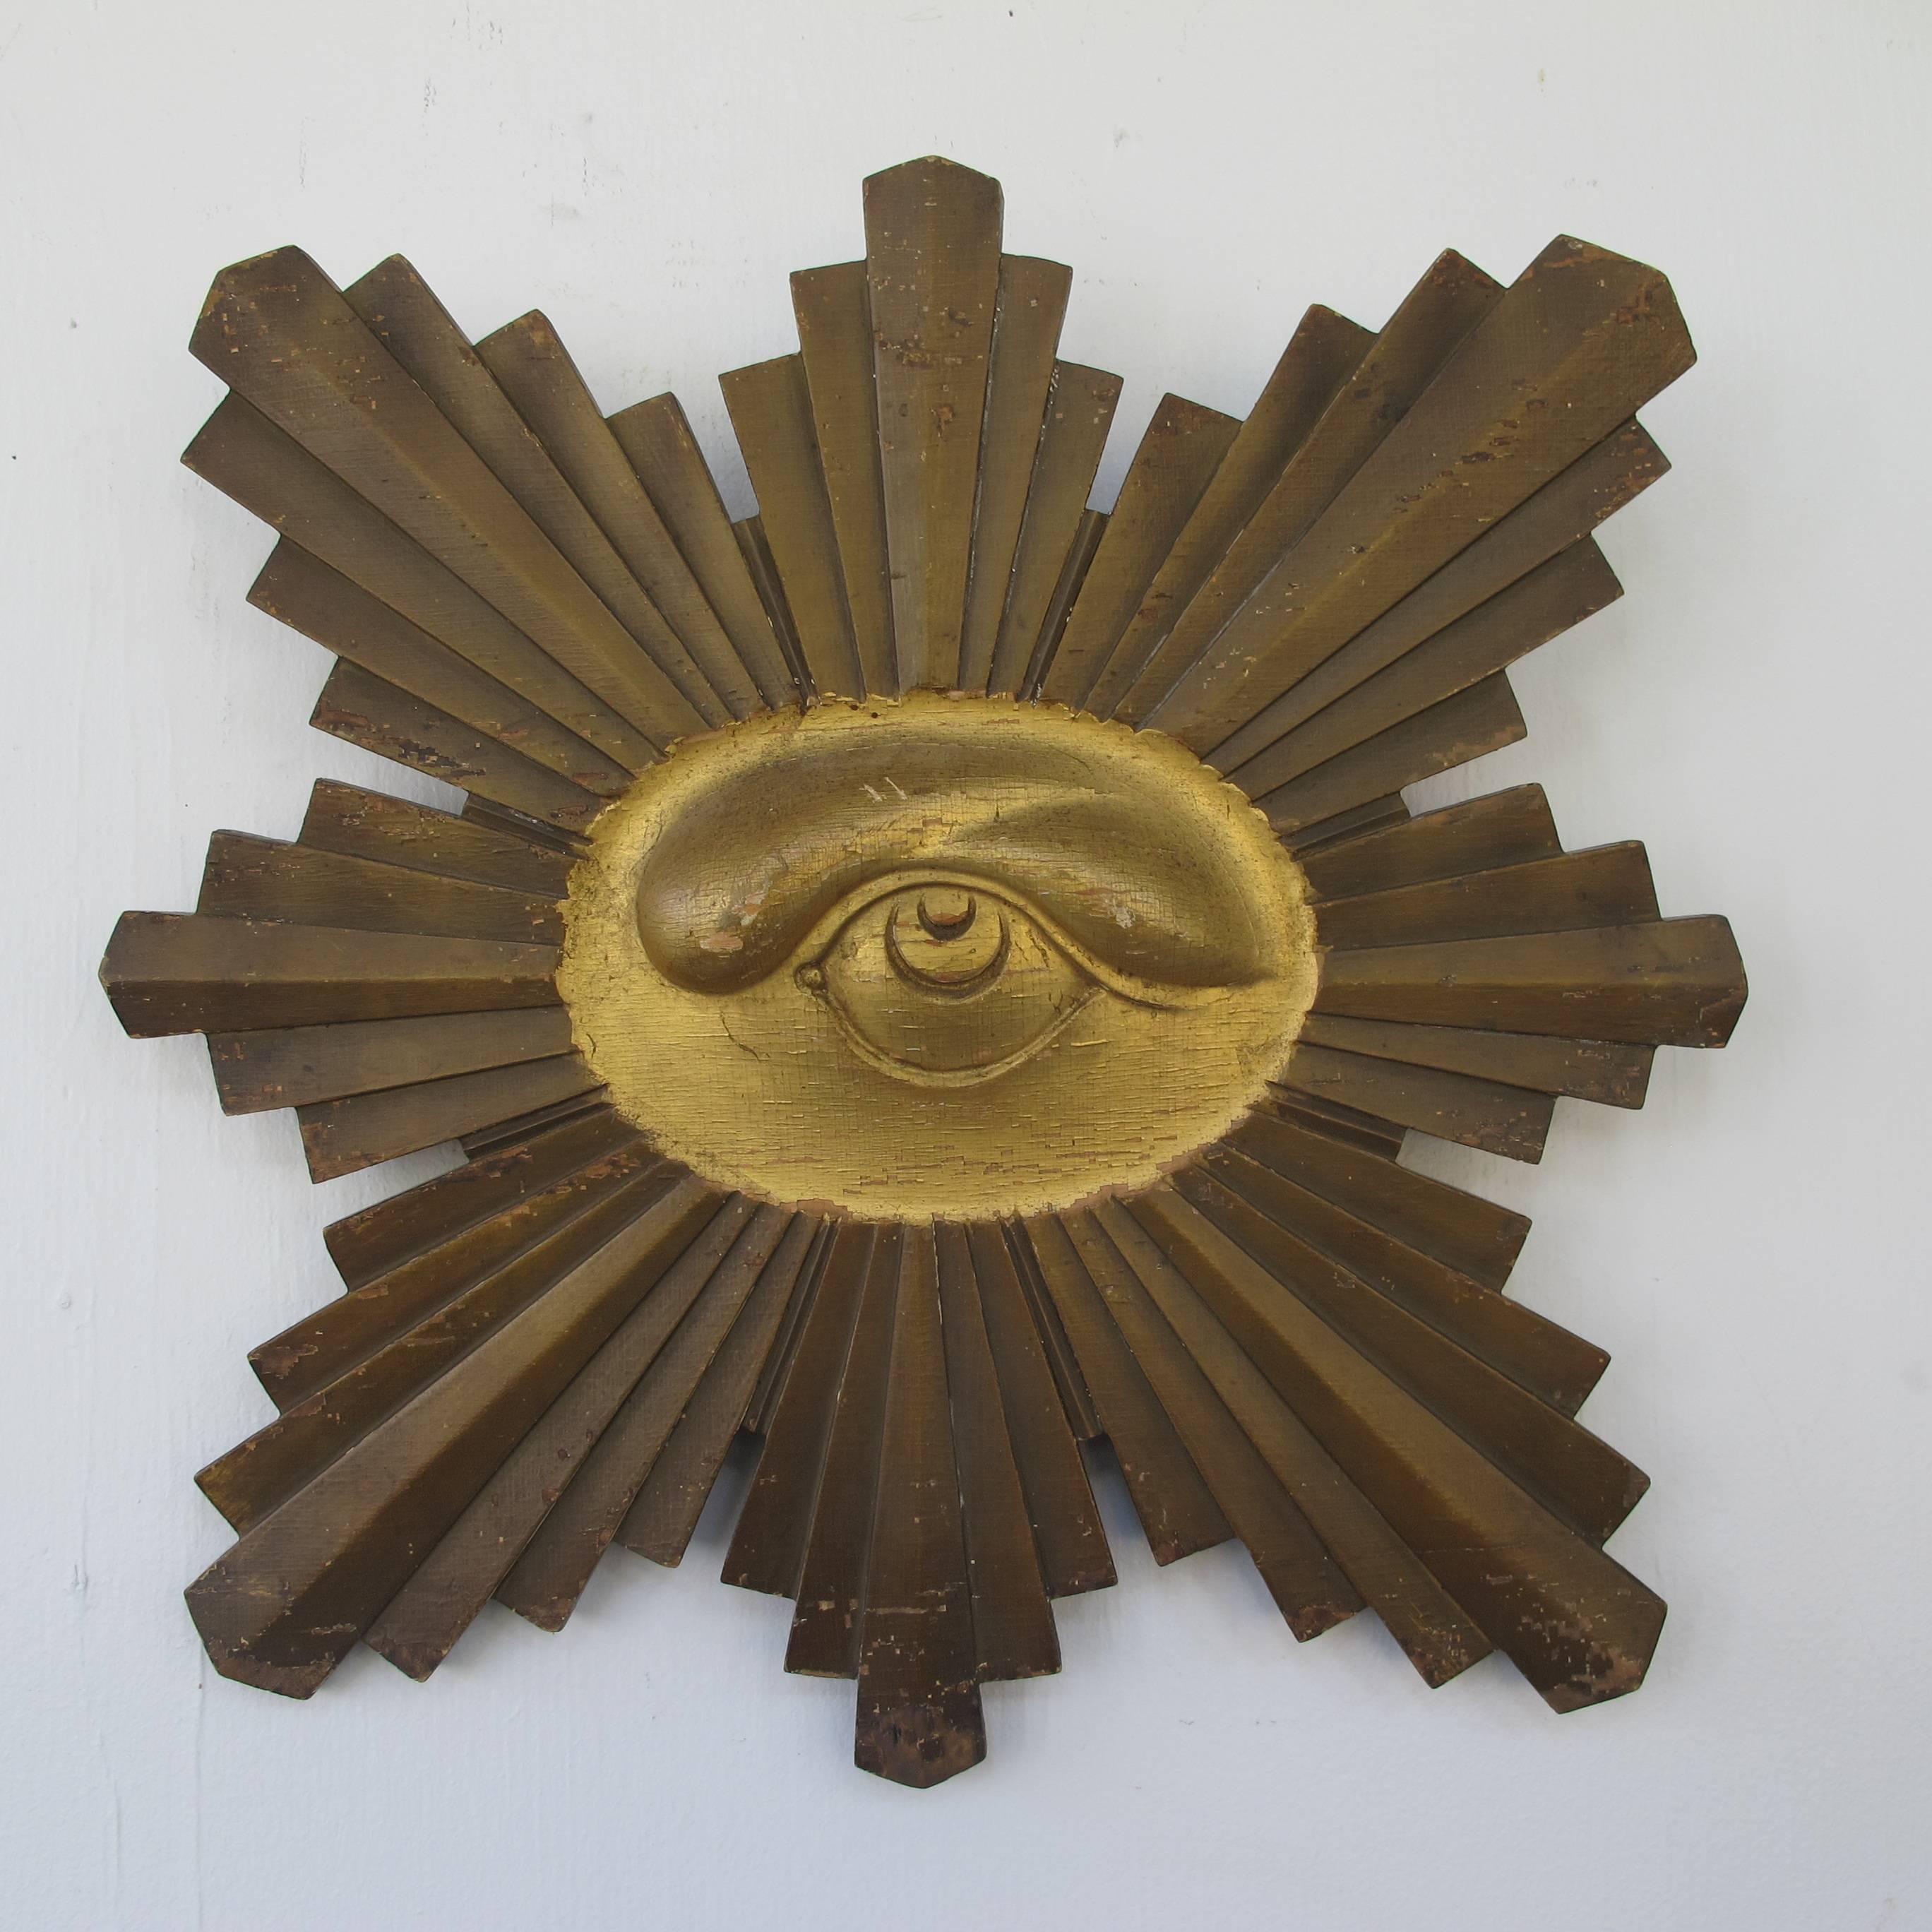 Early 20th Century Odd Fellows Fraternal Lodge Radiant All Seeing Eye